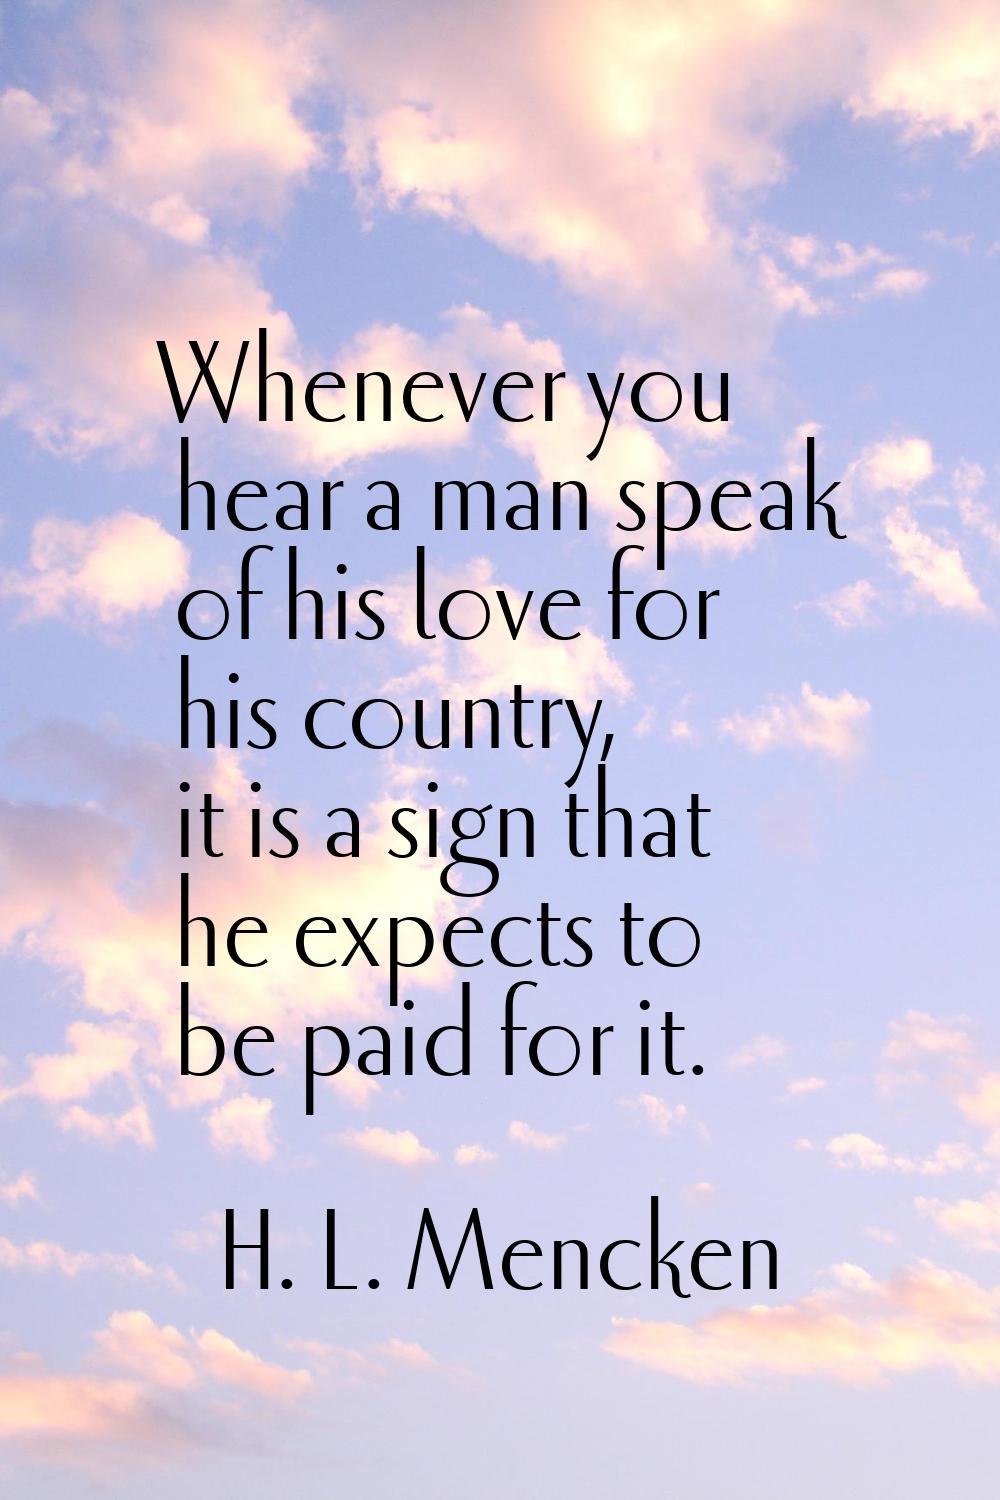 Whenever you hear a man speak of his love for his country, it is a sign that he expects to be paid 